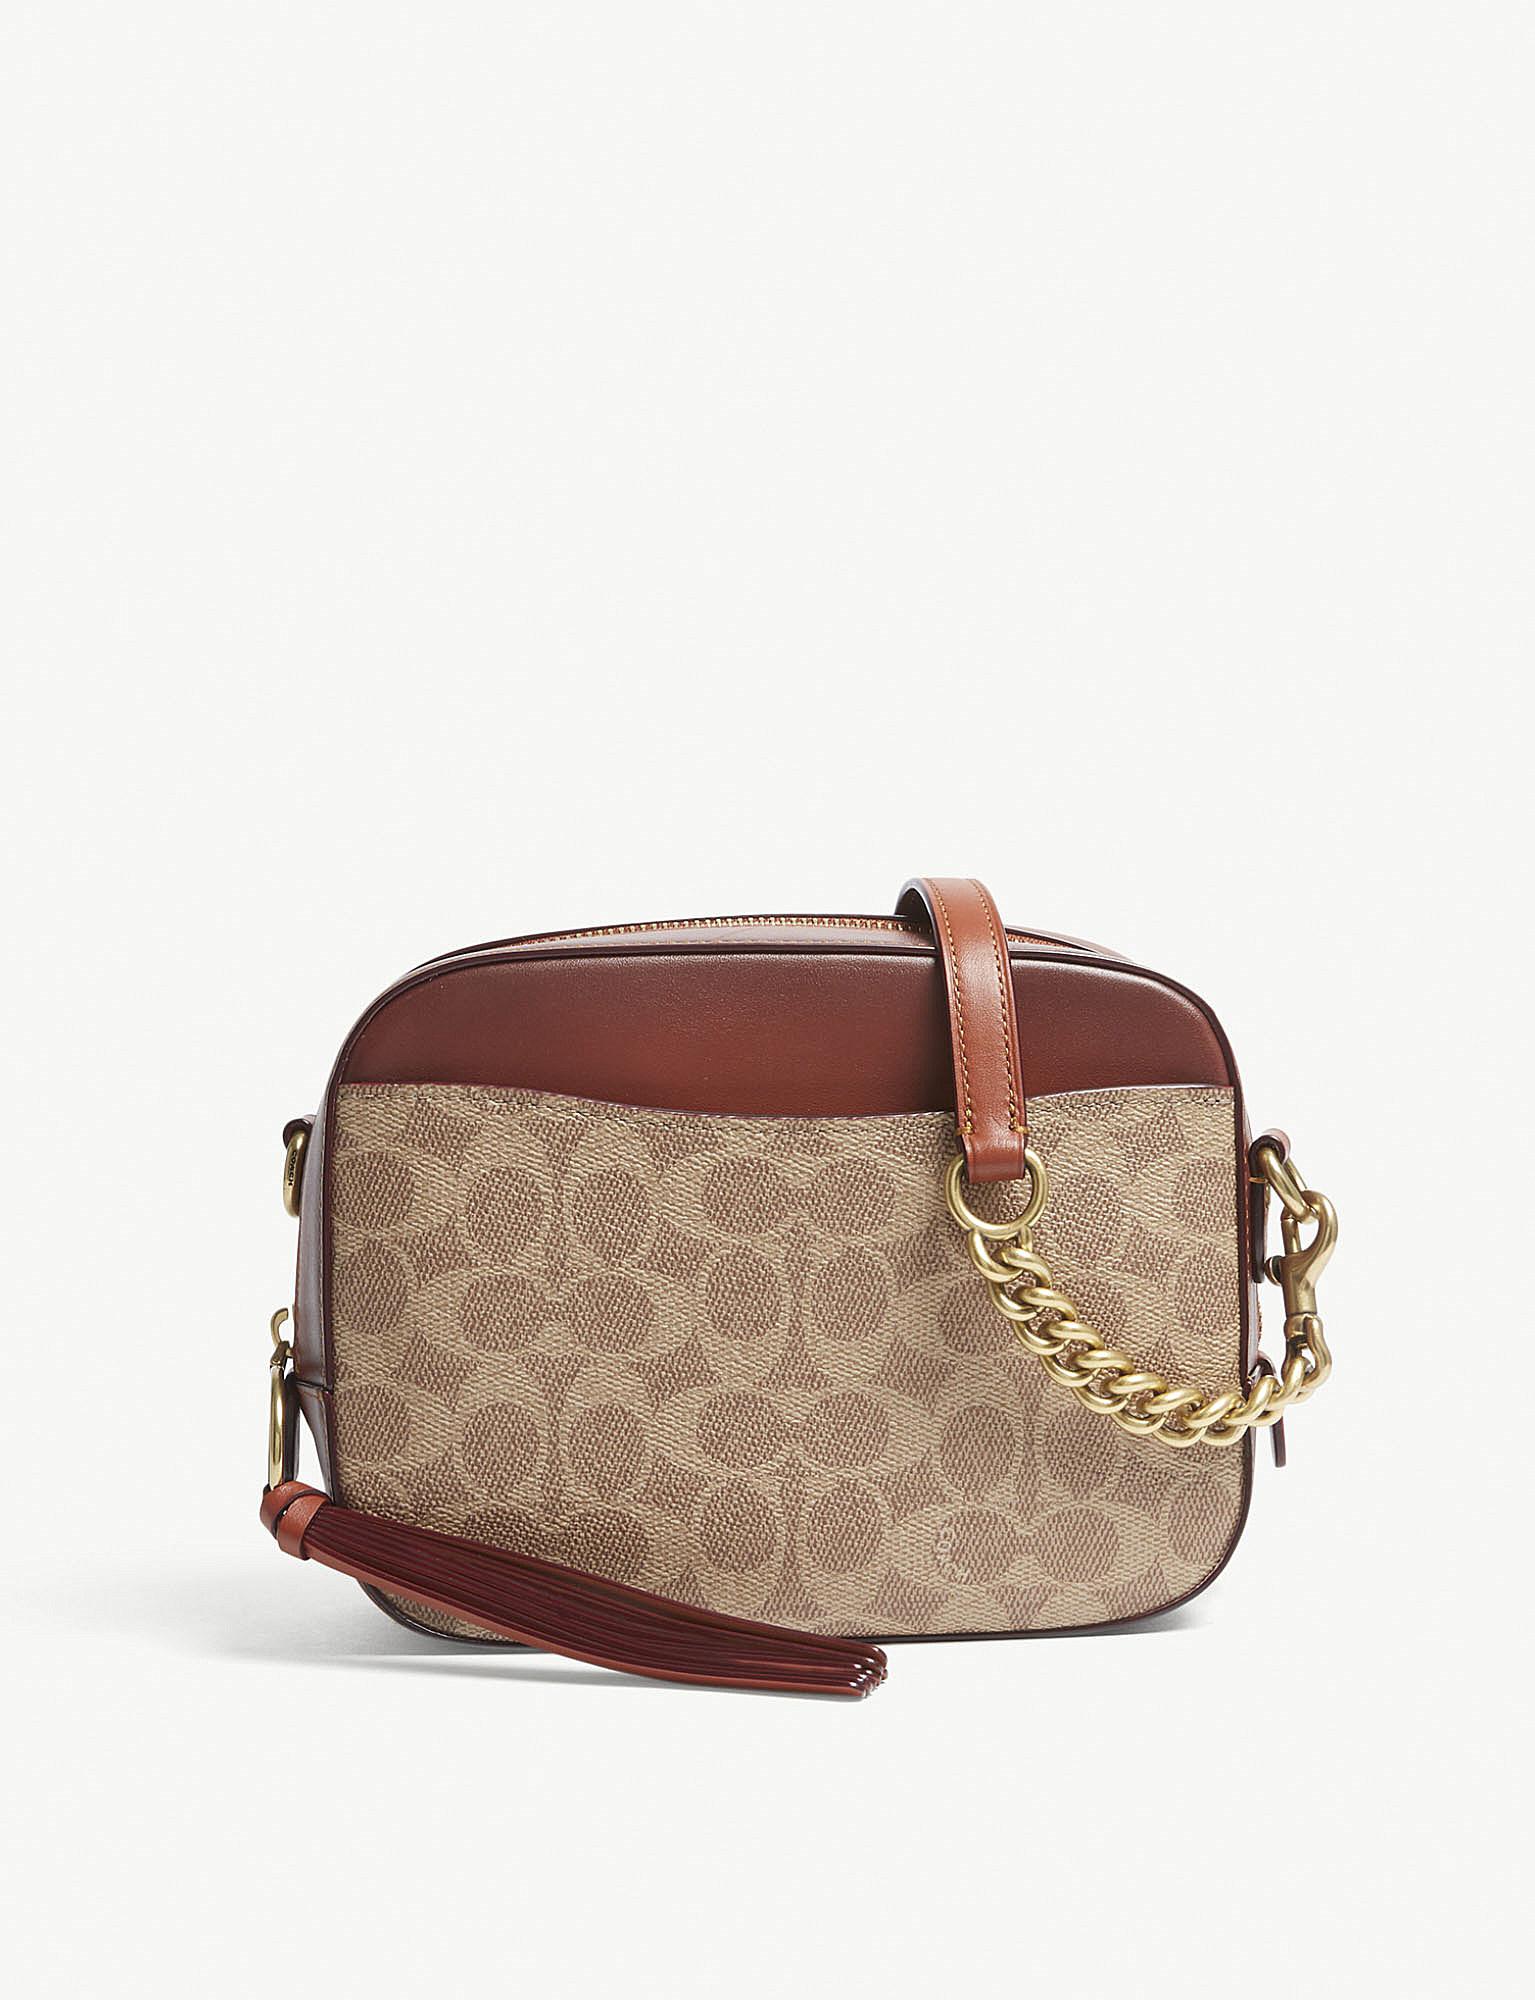 Coach Cross Over Bags Outlet, 59% OFF | empow-her.com